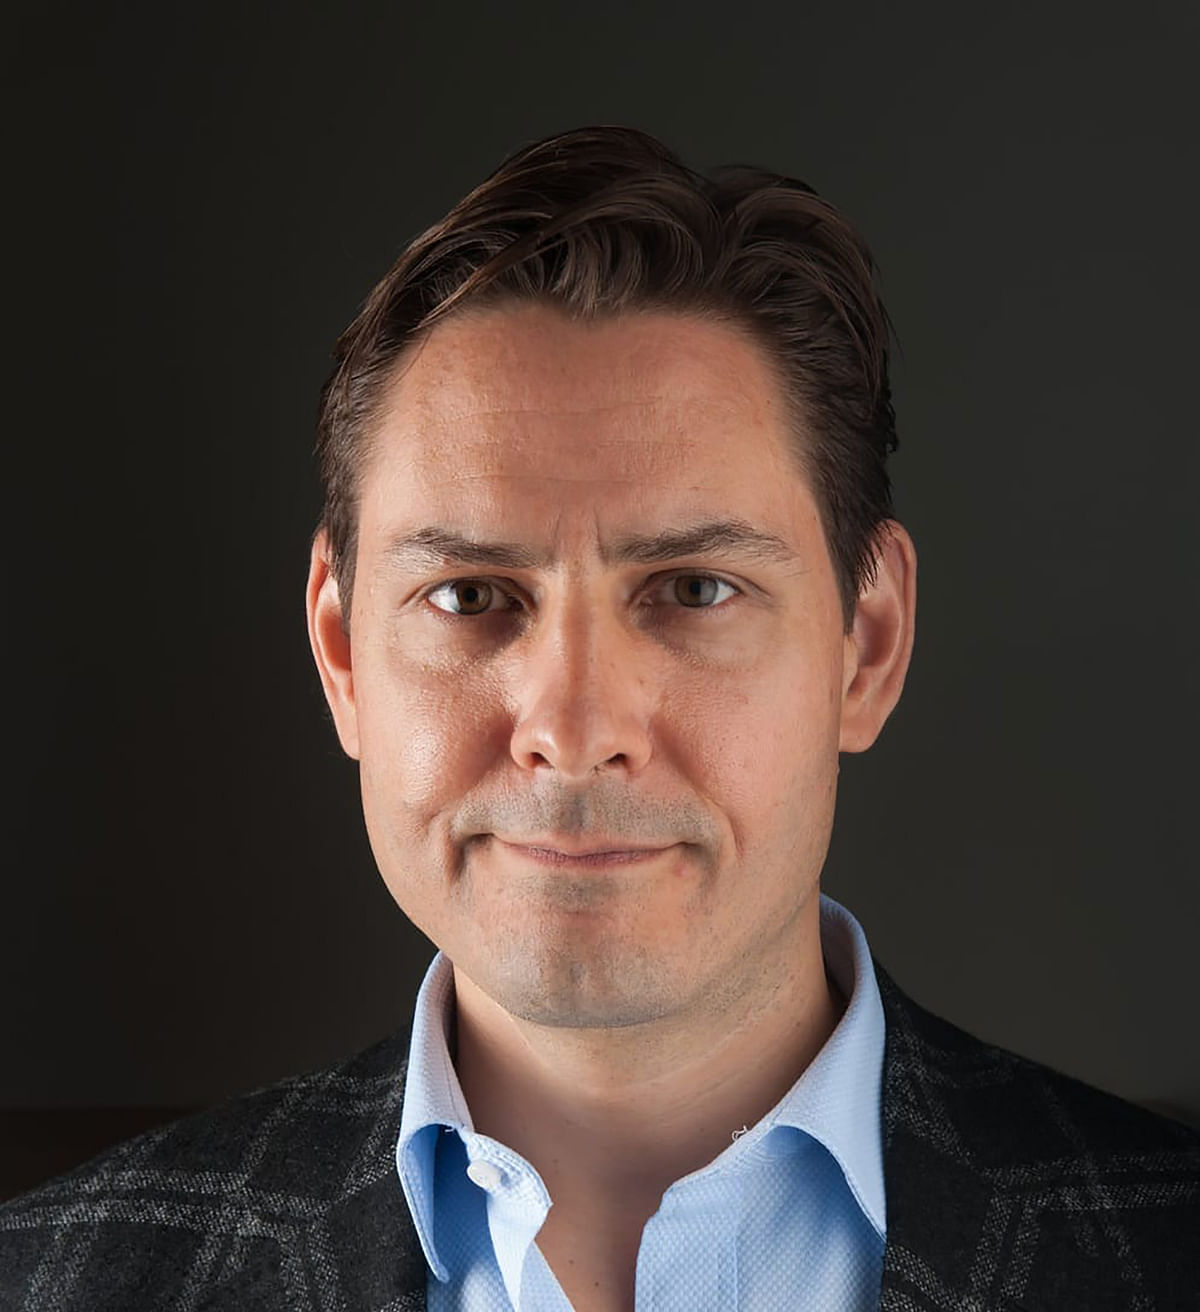 Undated portrait picture released on 12 December 2018 in Washington by the International Crisis Group of former Canadian diplomat Michael Kovrig. Photo: AFP